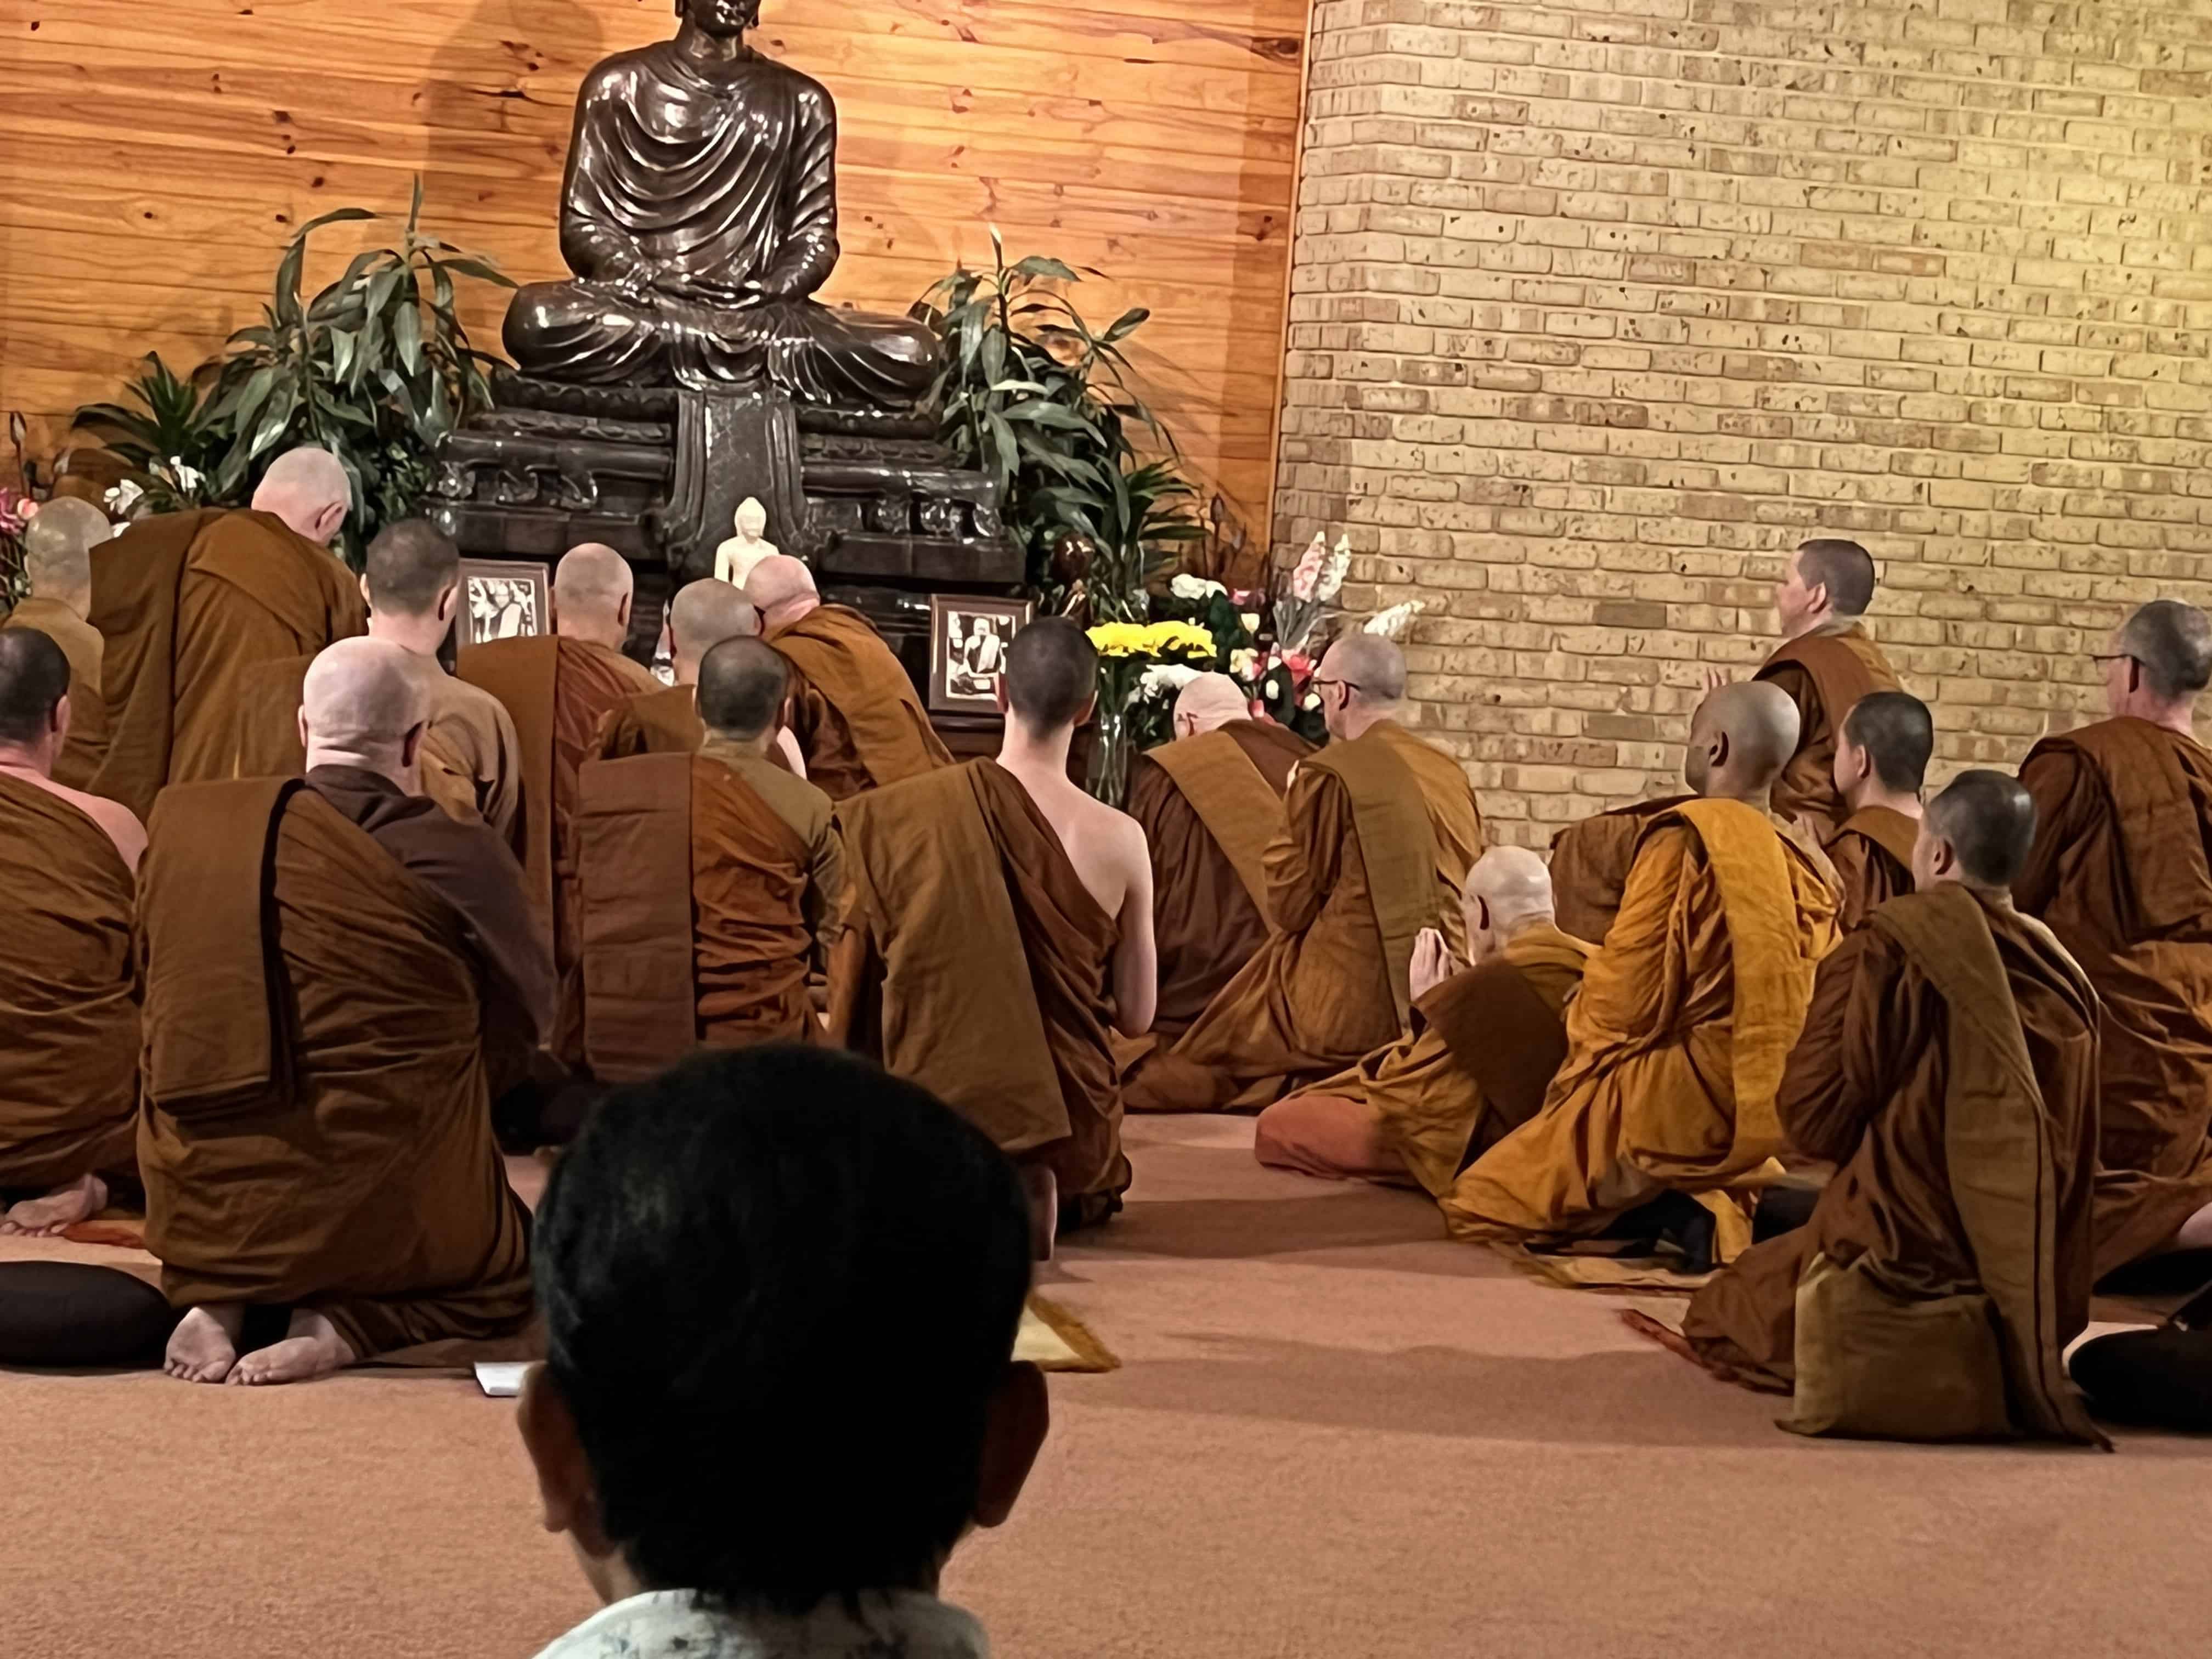 Group of monks bowing to the Buddha